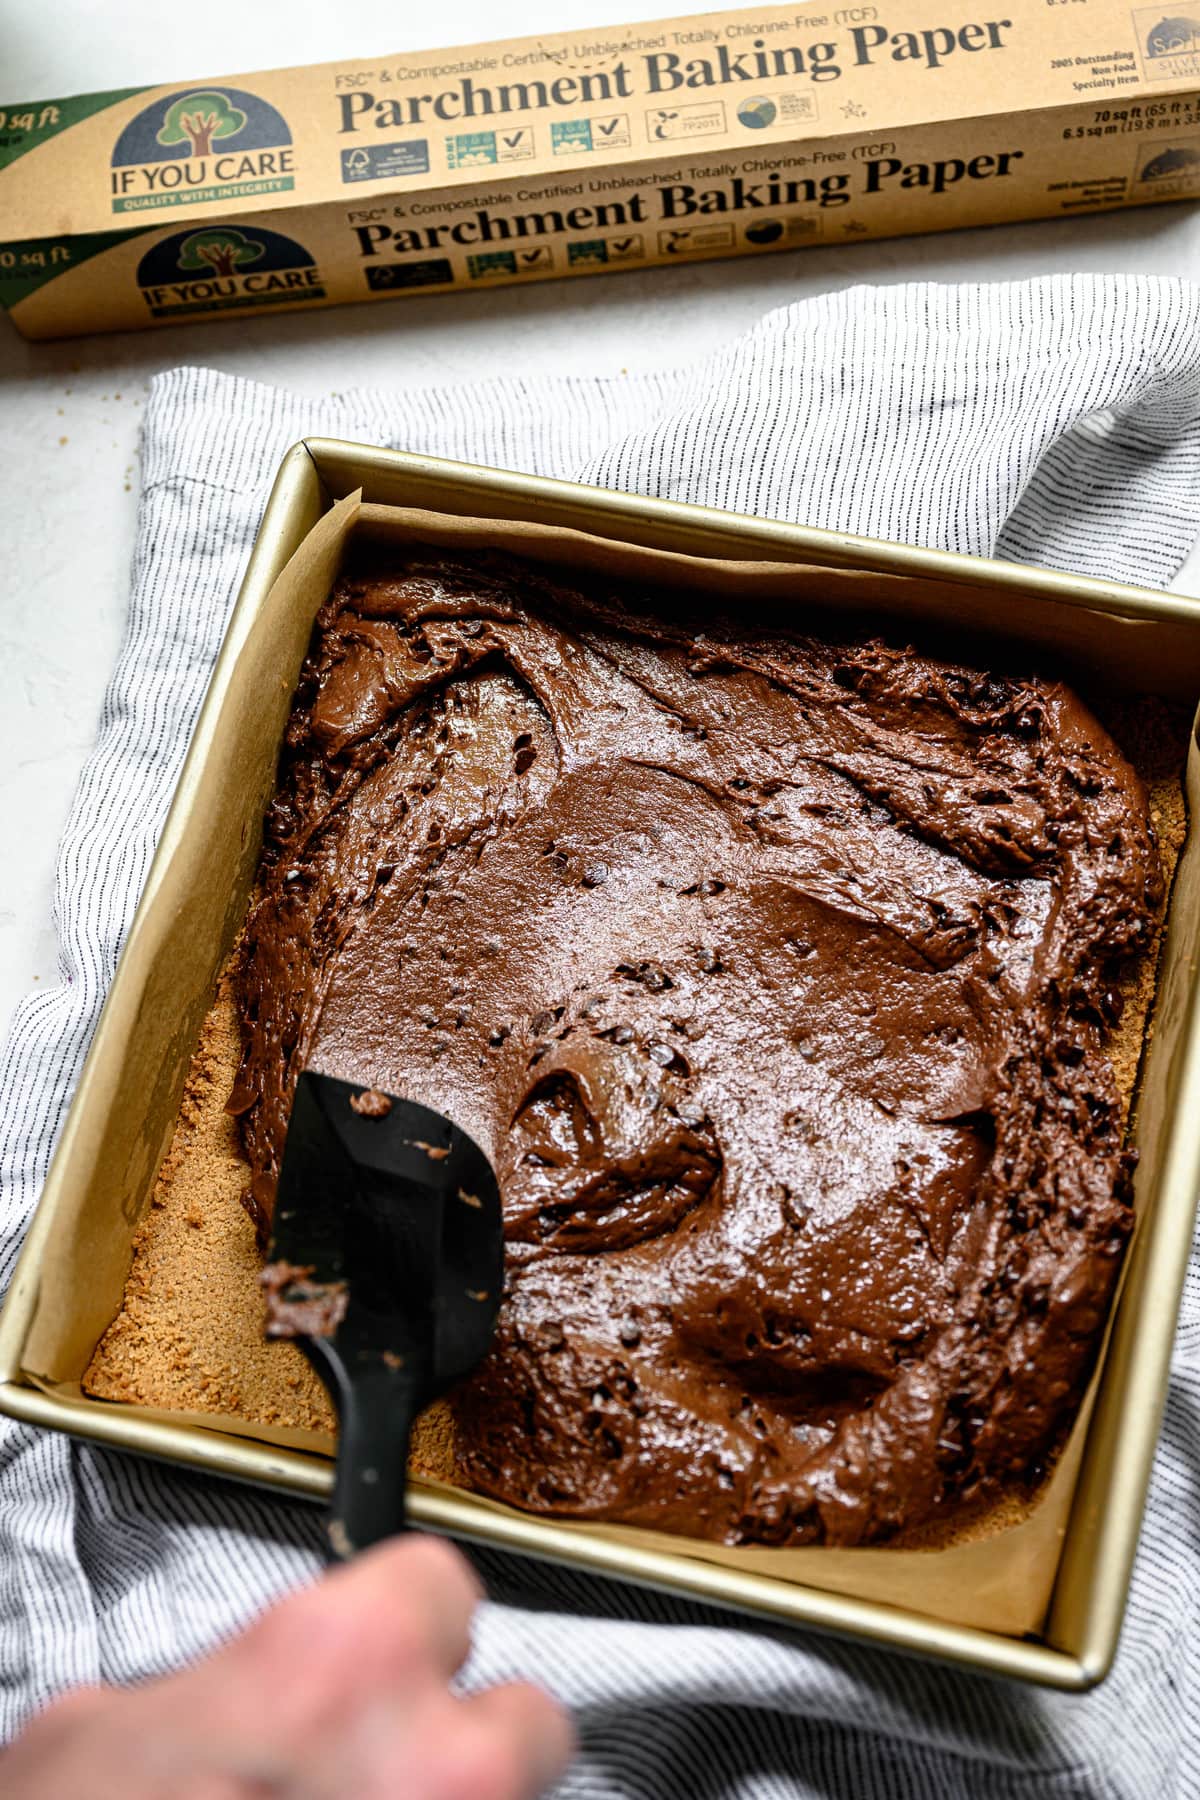 Side view of person spreading brownie batter into square pan lined with parchment paper